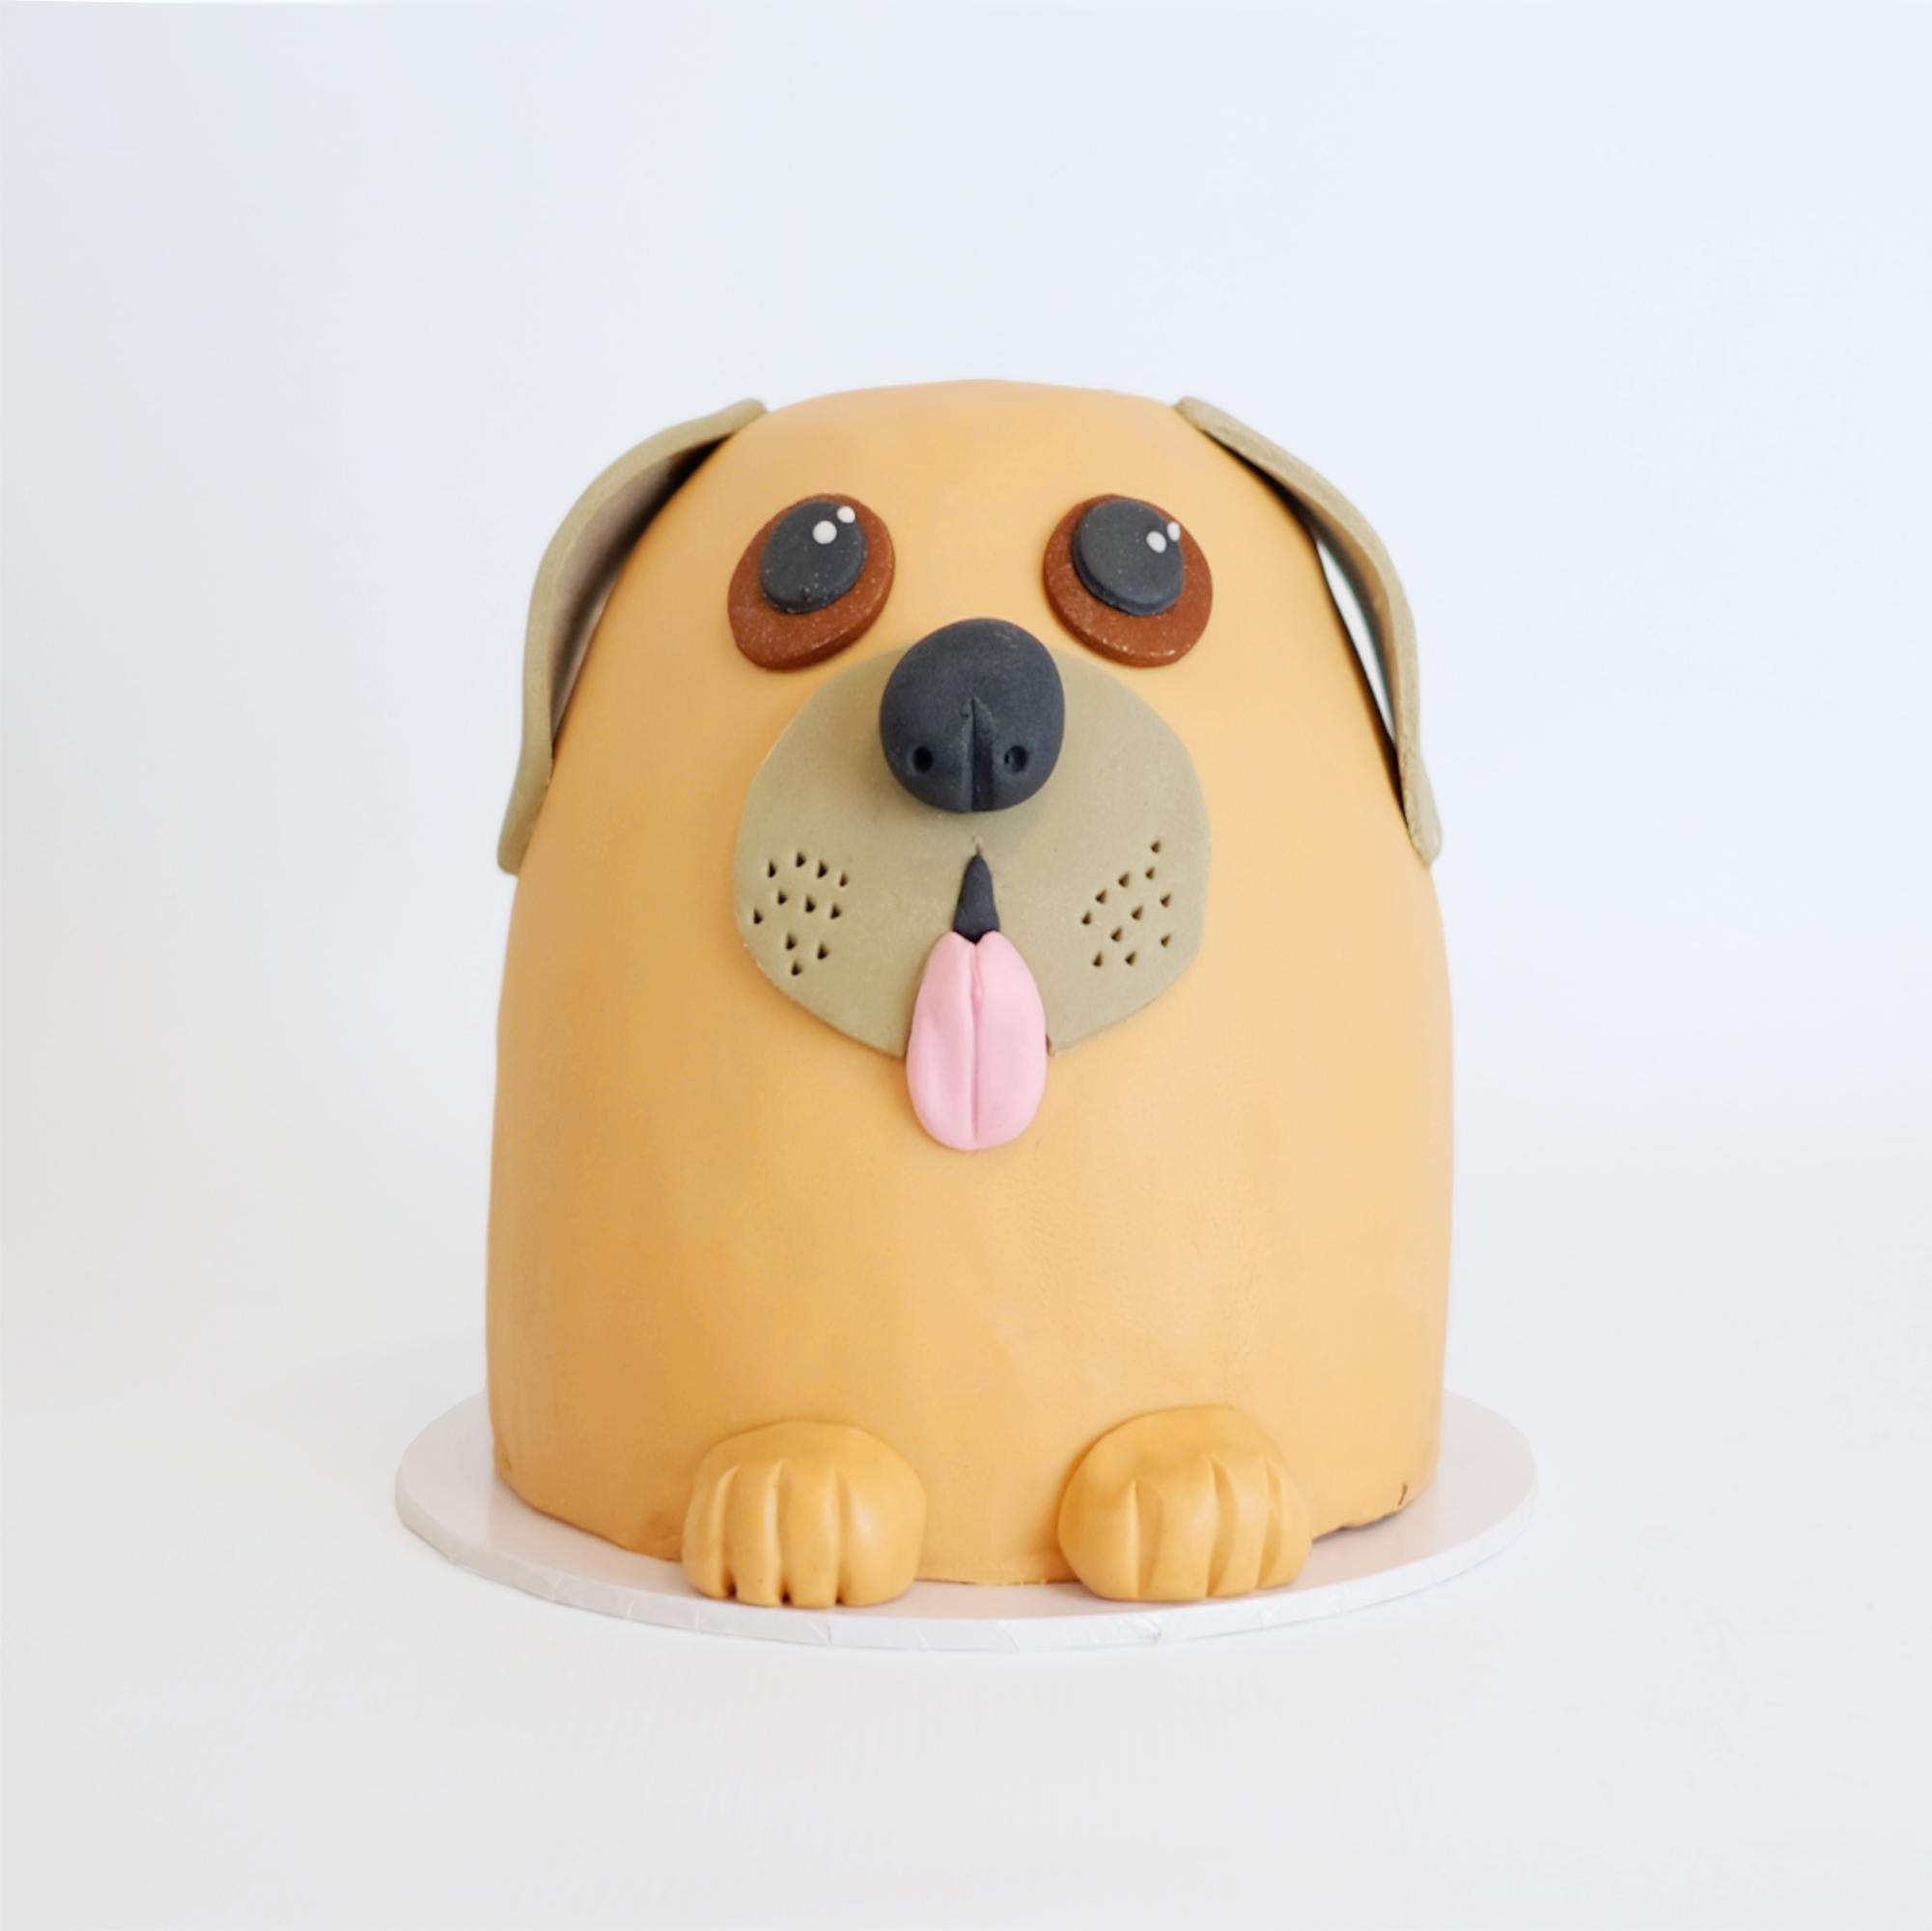 Look at this adorable pug cake | Metro News